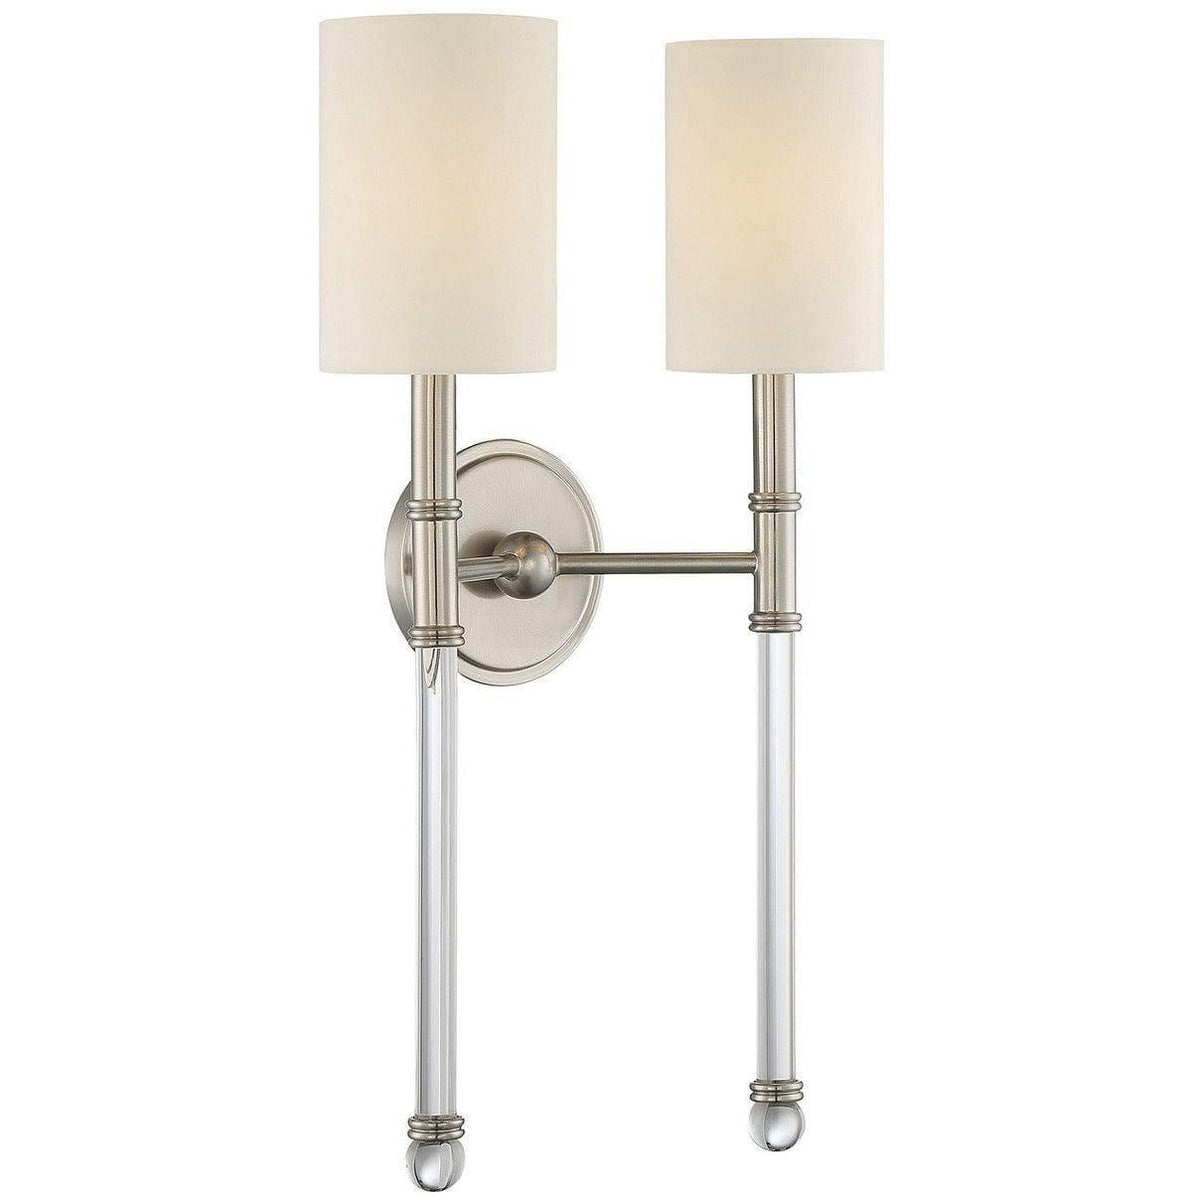 Savoy House - Fremont Two Light Wall Sconce - 9-103-2-SN | Montreal Lighting & Hardware